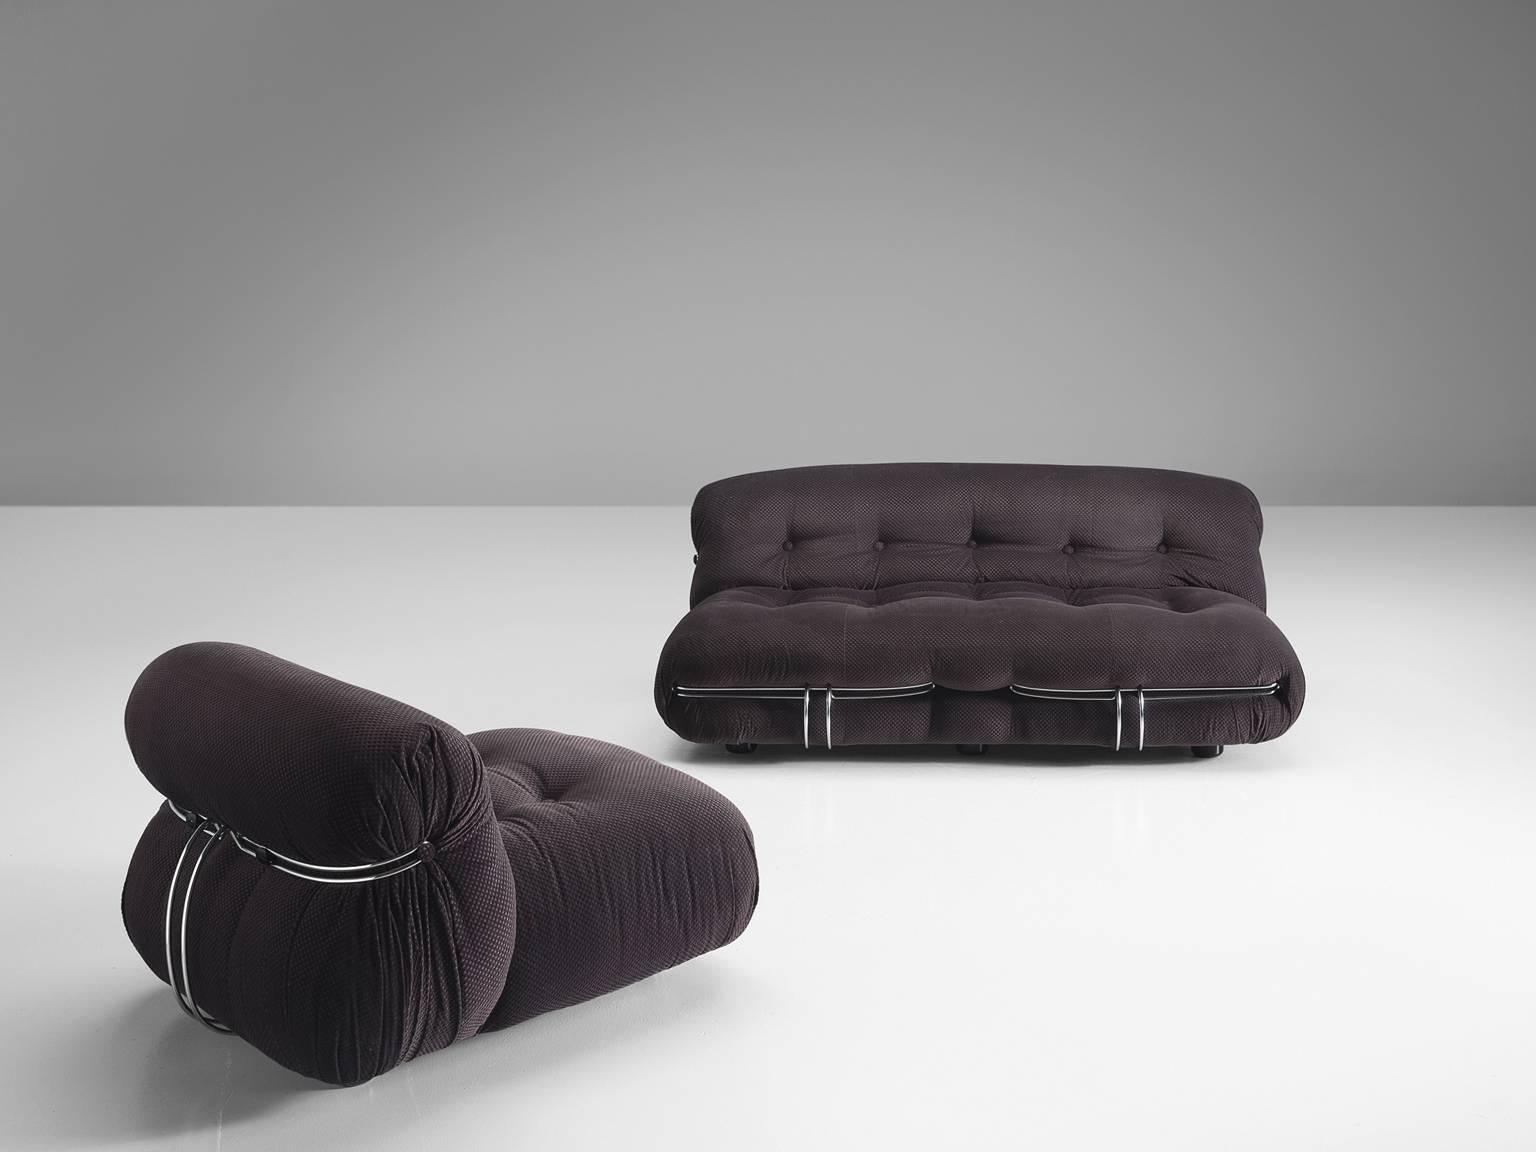 'Soriana' sofa and lounge chair, in grey fabric and metal, by Afra & Tobia Scarpa for Cassina, Italy, 1969. 

Iconic sofa and lounge chair by Italian designer couple Afra & Tobia Scarpa, the Soriana proposes a model that institutionalizes the